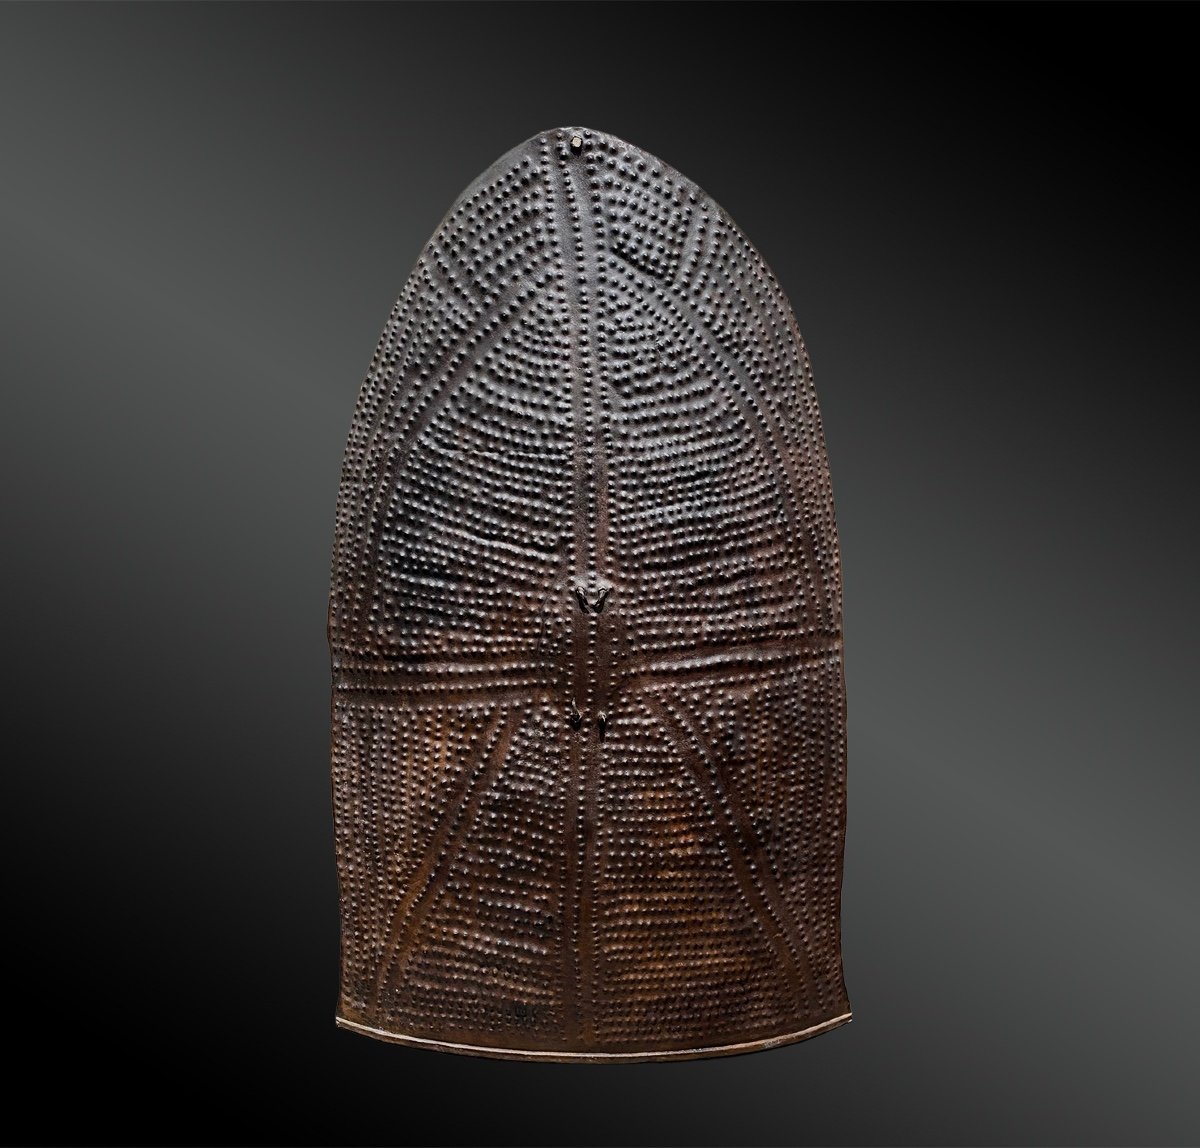 Shield Called Goko - Kirdi Culture, North Of Cameroon - First Half Of The 20th Century